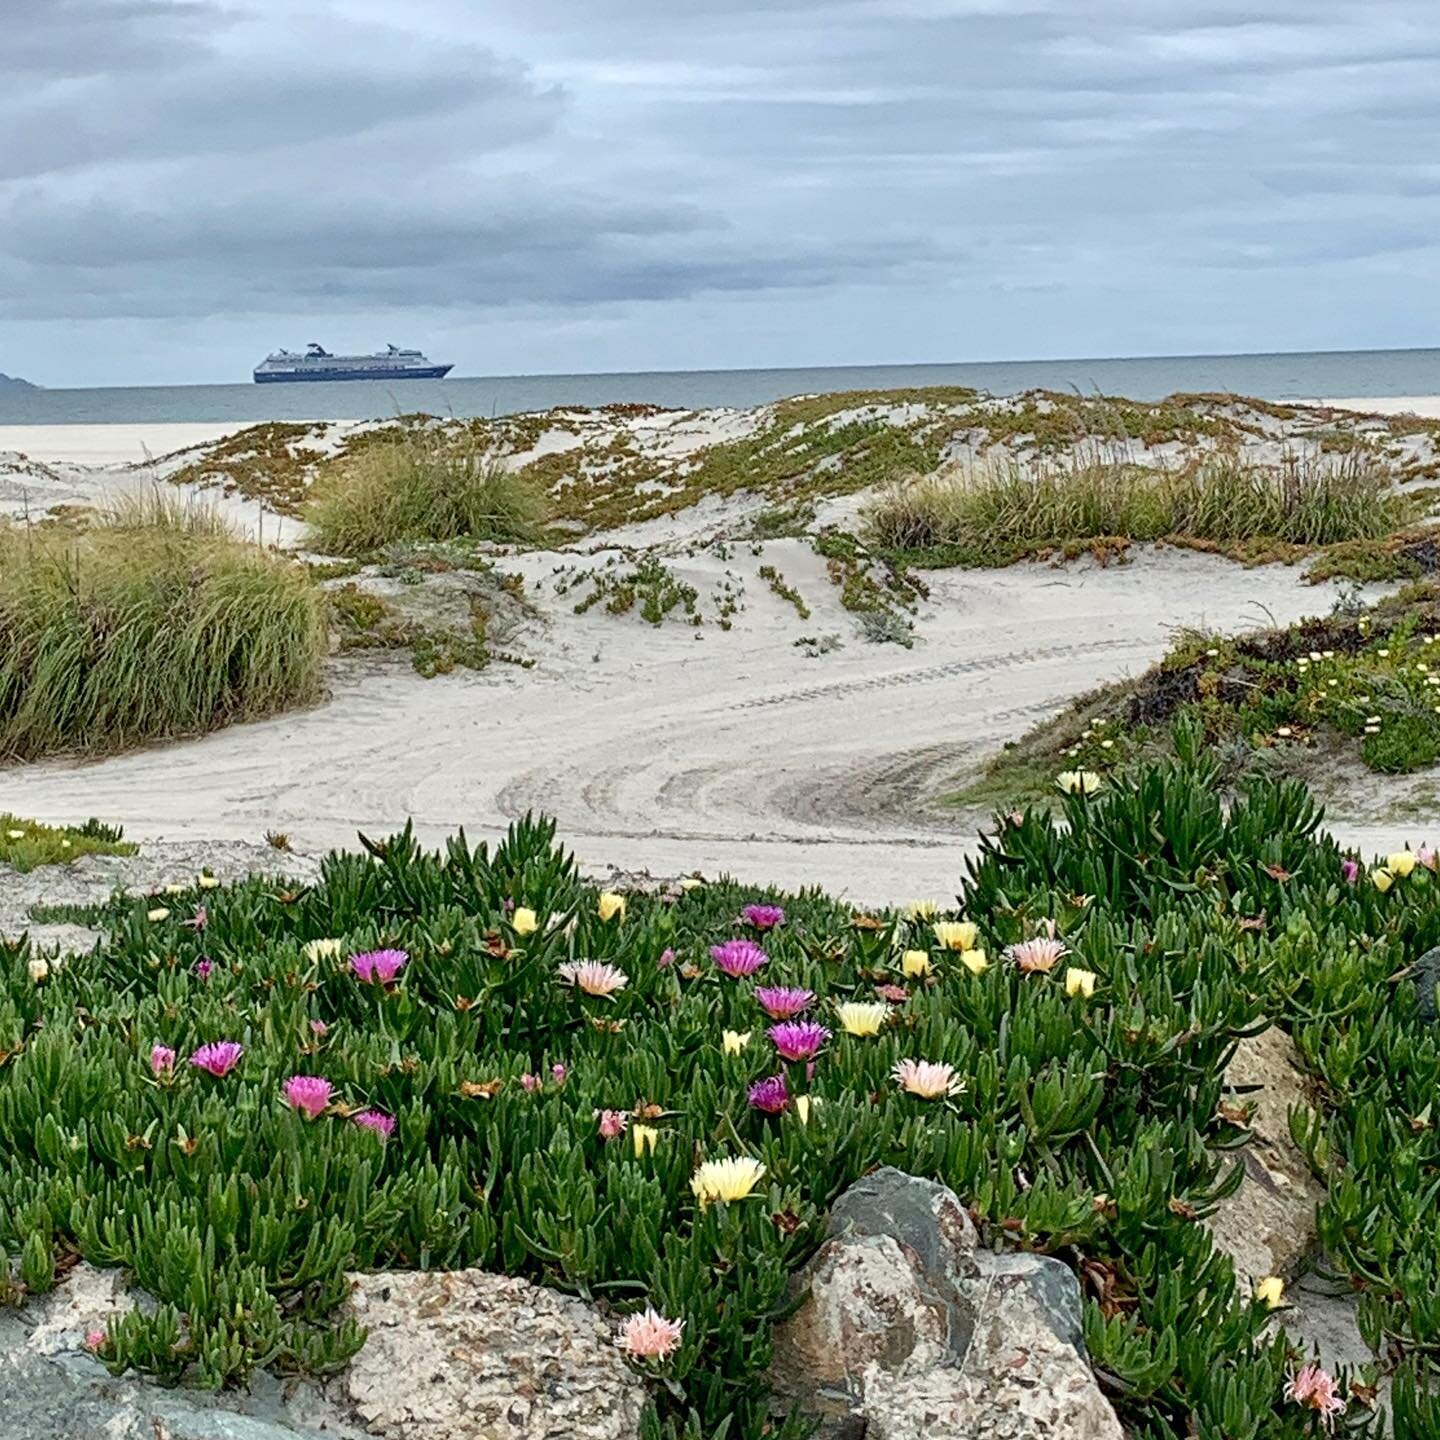 A closed beach and a stranded cruise ship. Signs of the times on Easter Sunday in Coronado, California. Another sign: Colorful wildflowers. A sign that spring has sprung and life will go on 🌷🌸🌺 #Easter #spring #wildflowers #beach #lifesabeach #vit